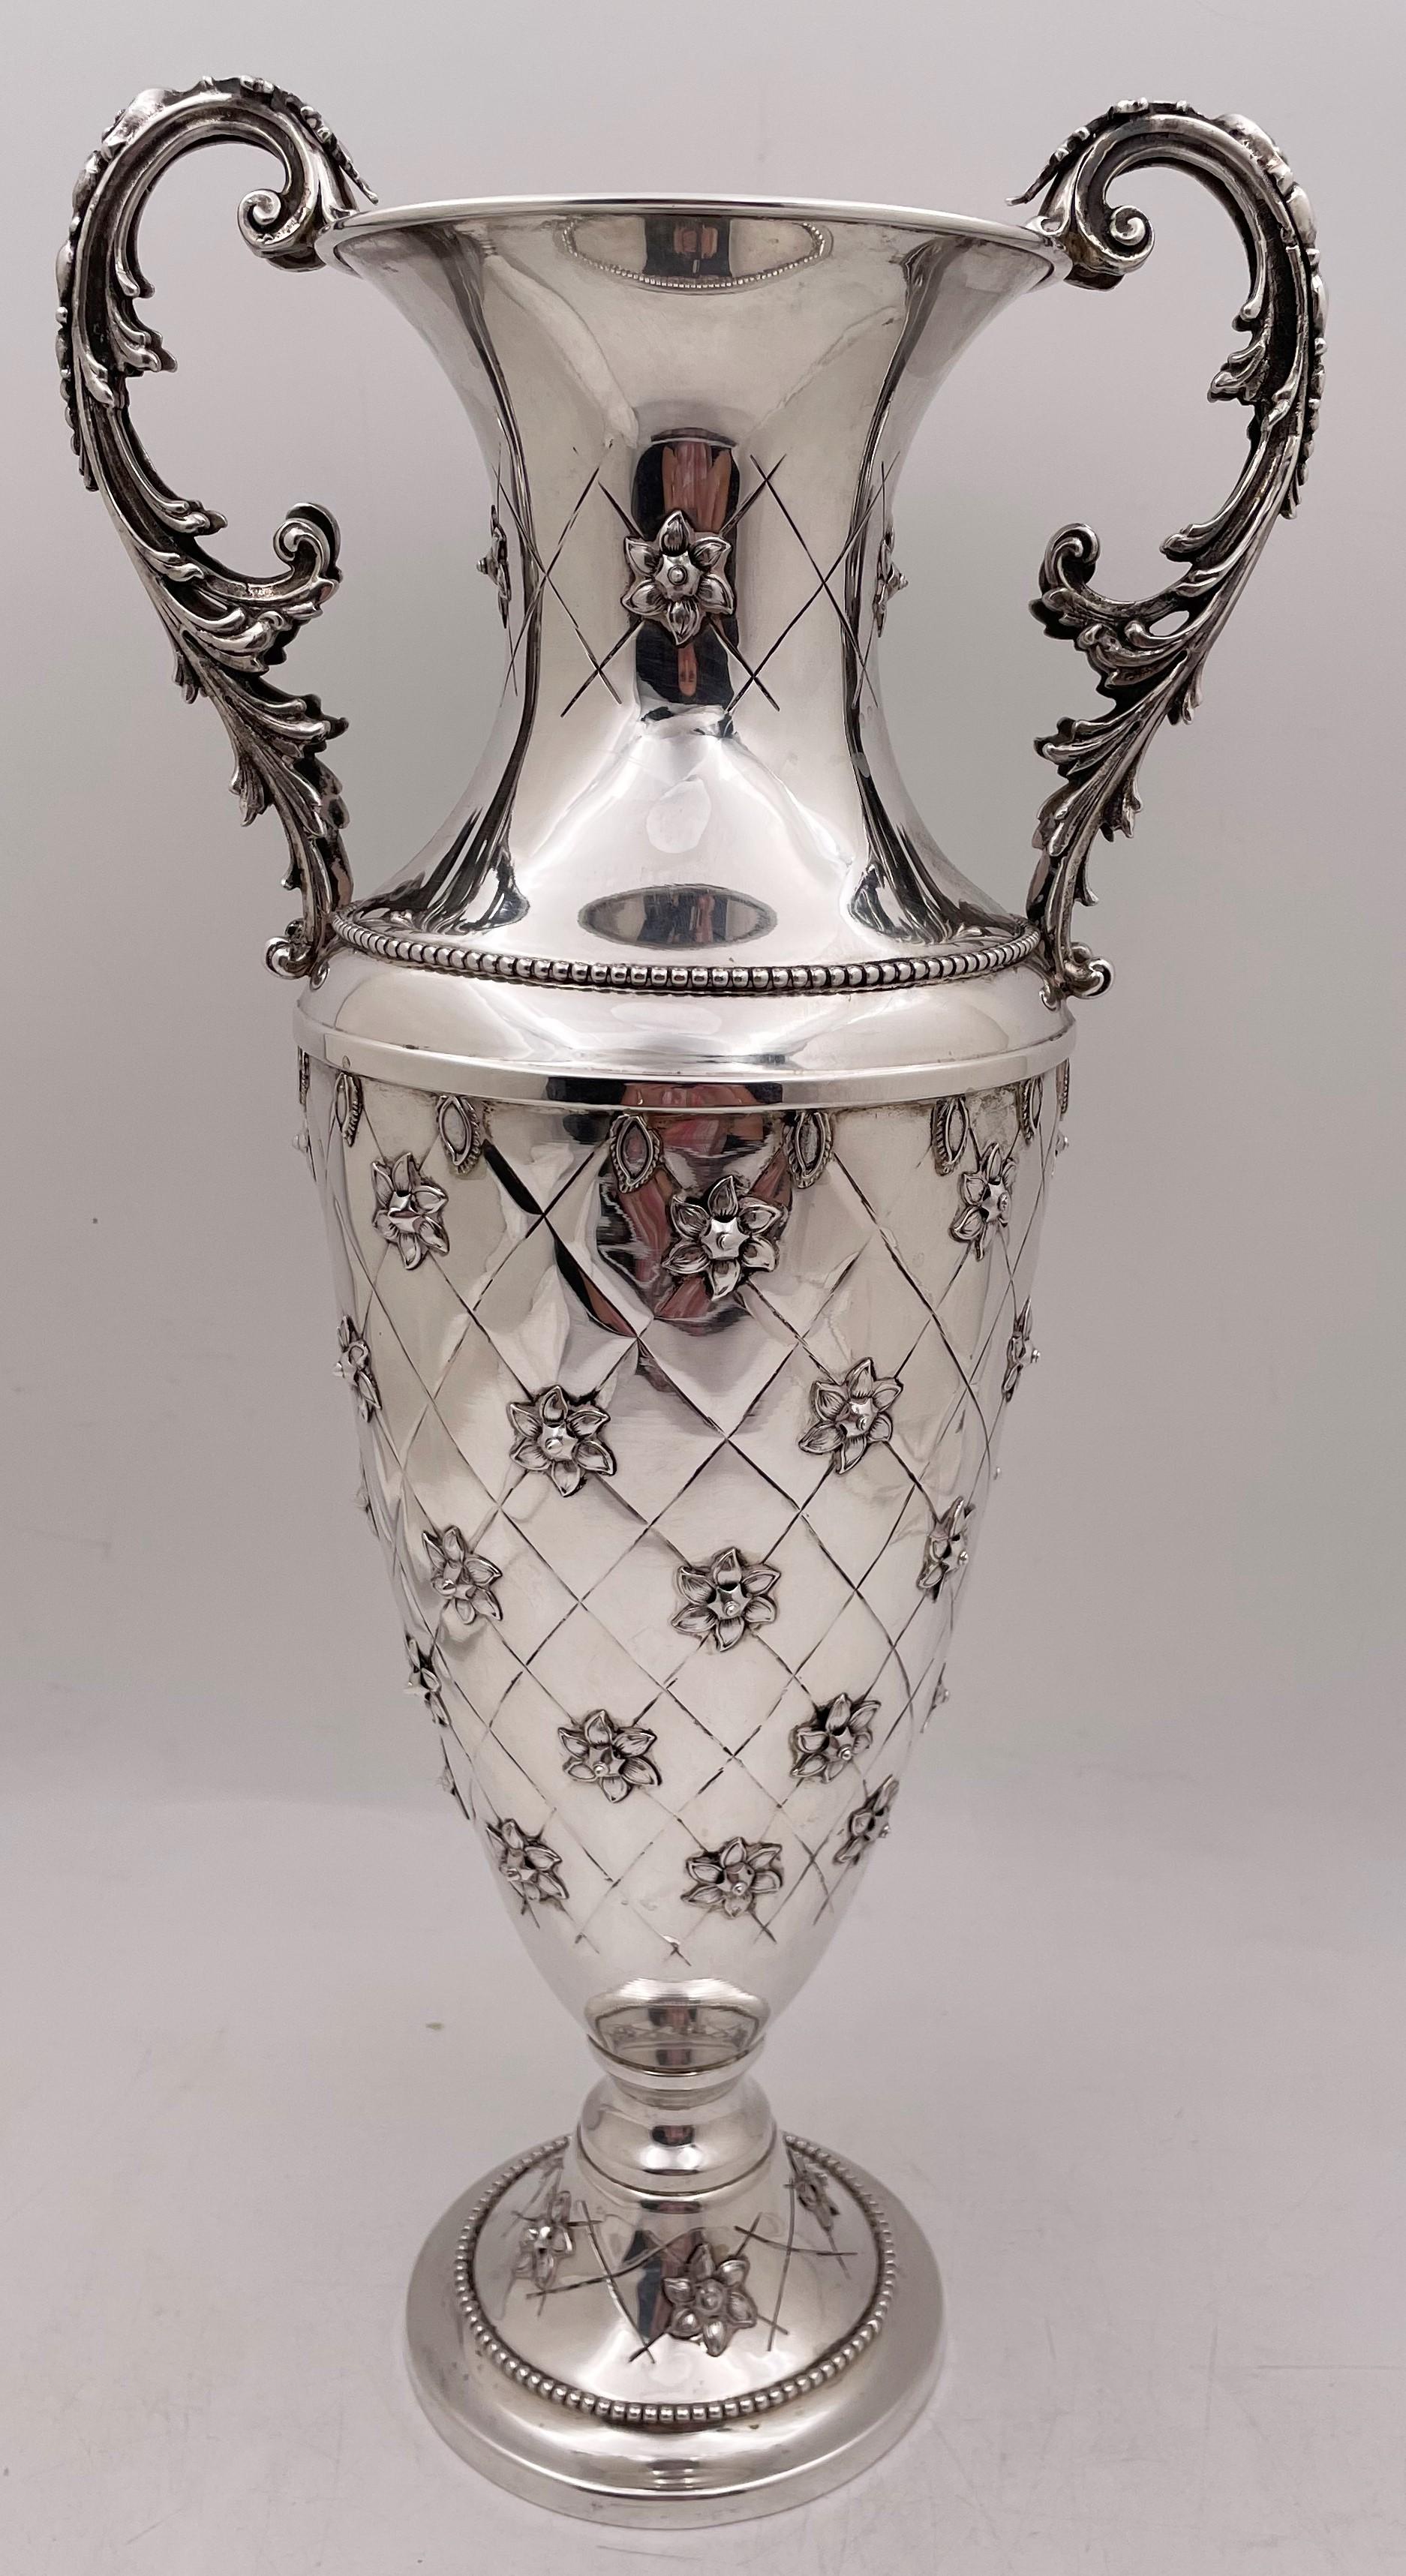 Sterling silver vase from the 20th century in a style reminiscent of Buccellati, with beaded motifs, applied floral motifs, and an elegant, geometric design, measuring 17 3/8'' in height by 8 1/2'' from handle to handle (4 7/8'' in diameter at the